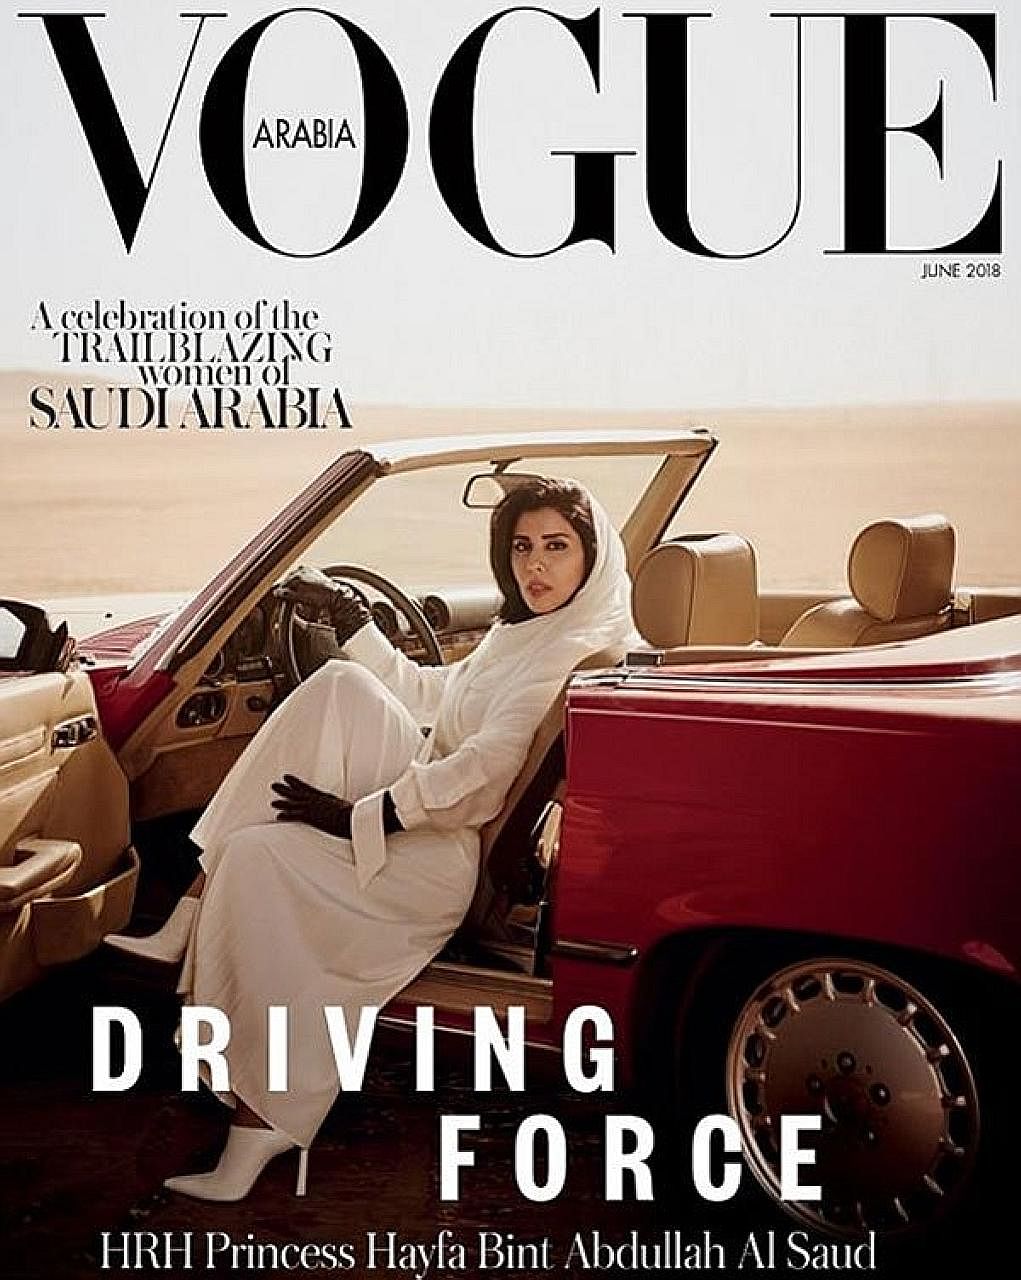 Saudi Princess Hayfa bint Abdullah al-Saud was pictured behind the wheel of a red convertible on Vogue Arabia's cover.